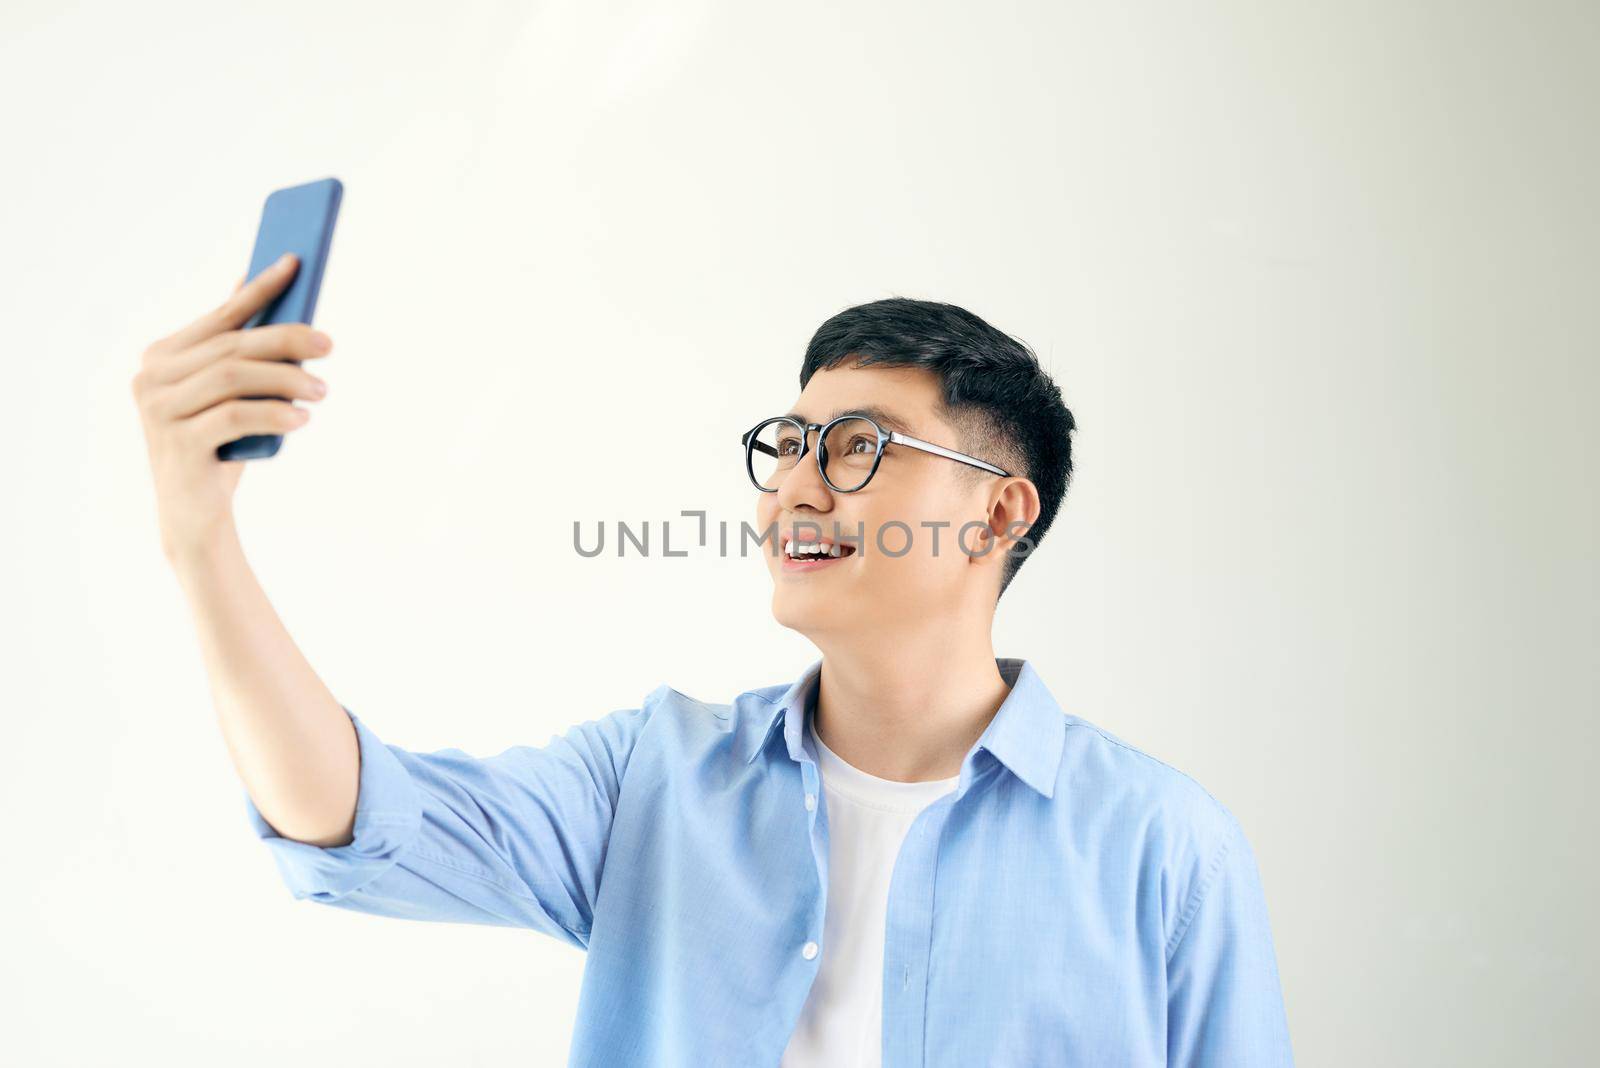 Manager taking pictures with his smartphone